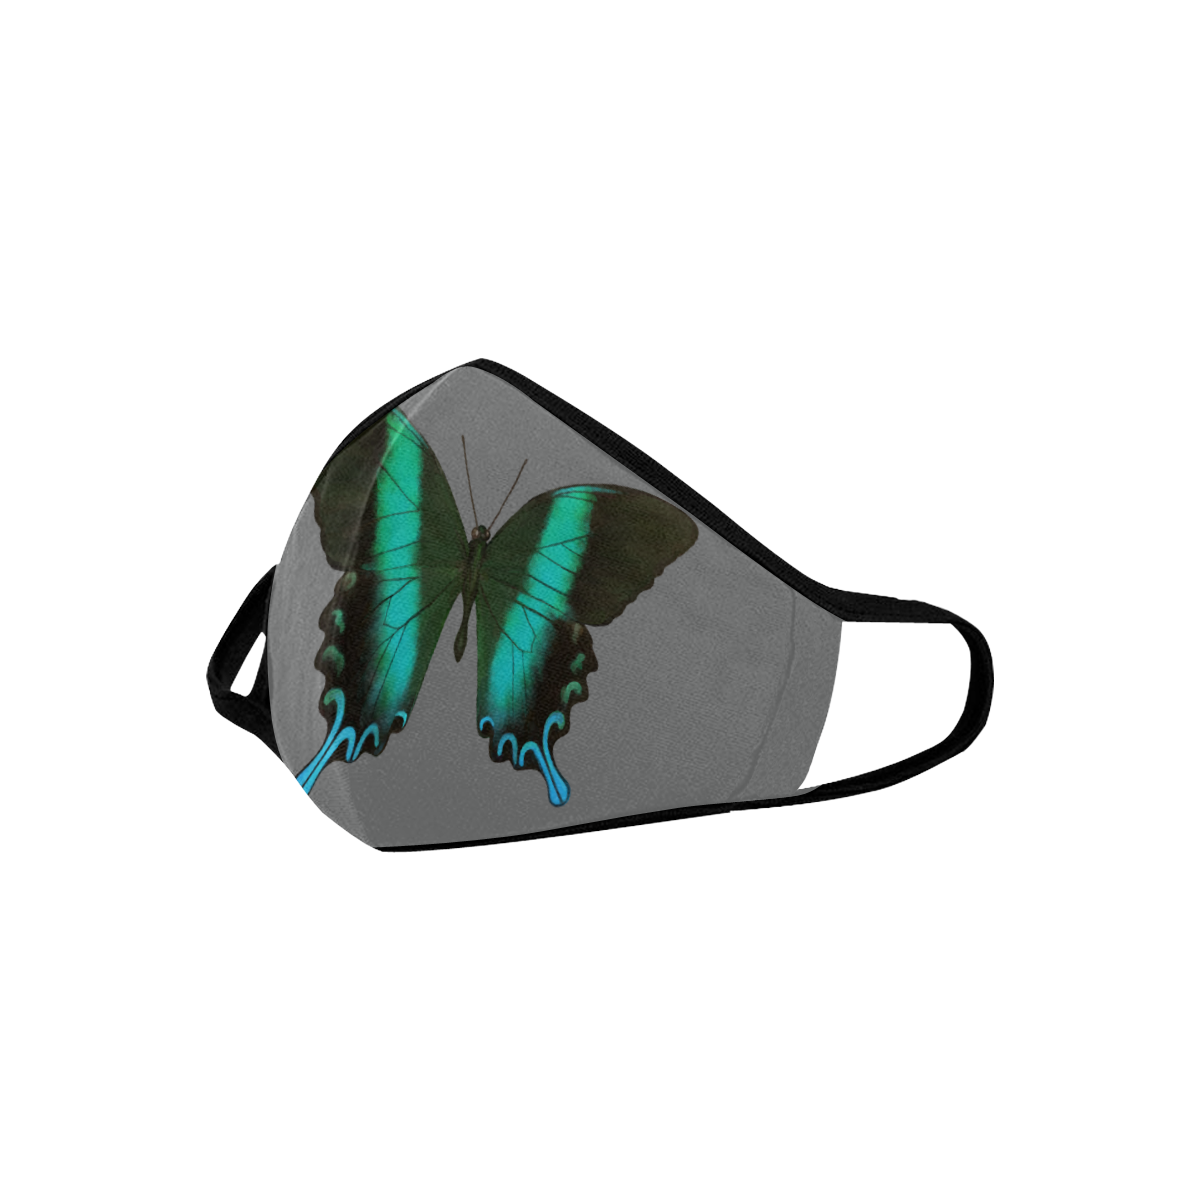 Papilio blumei butterfly painting Mouth Mask